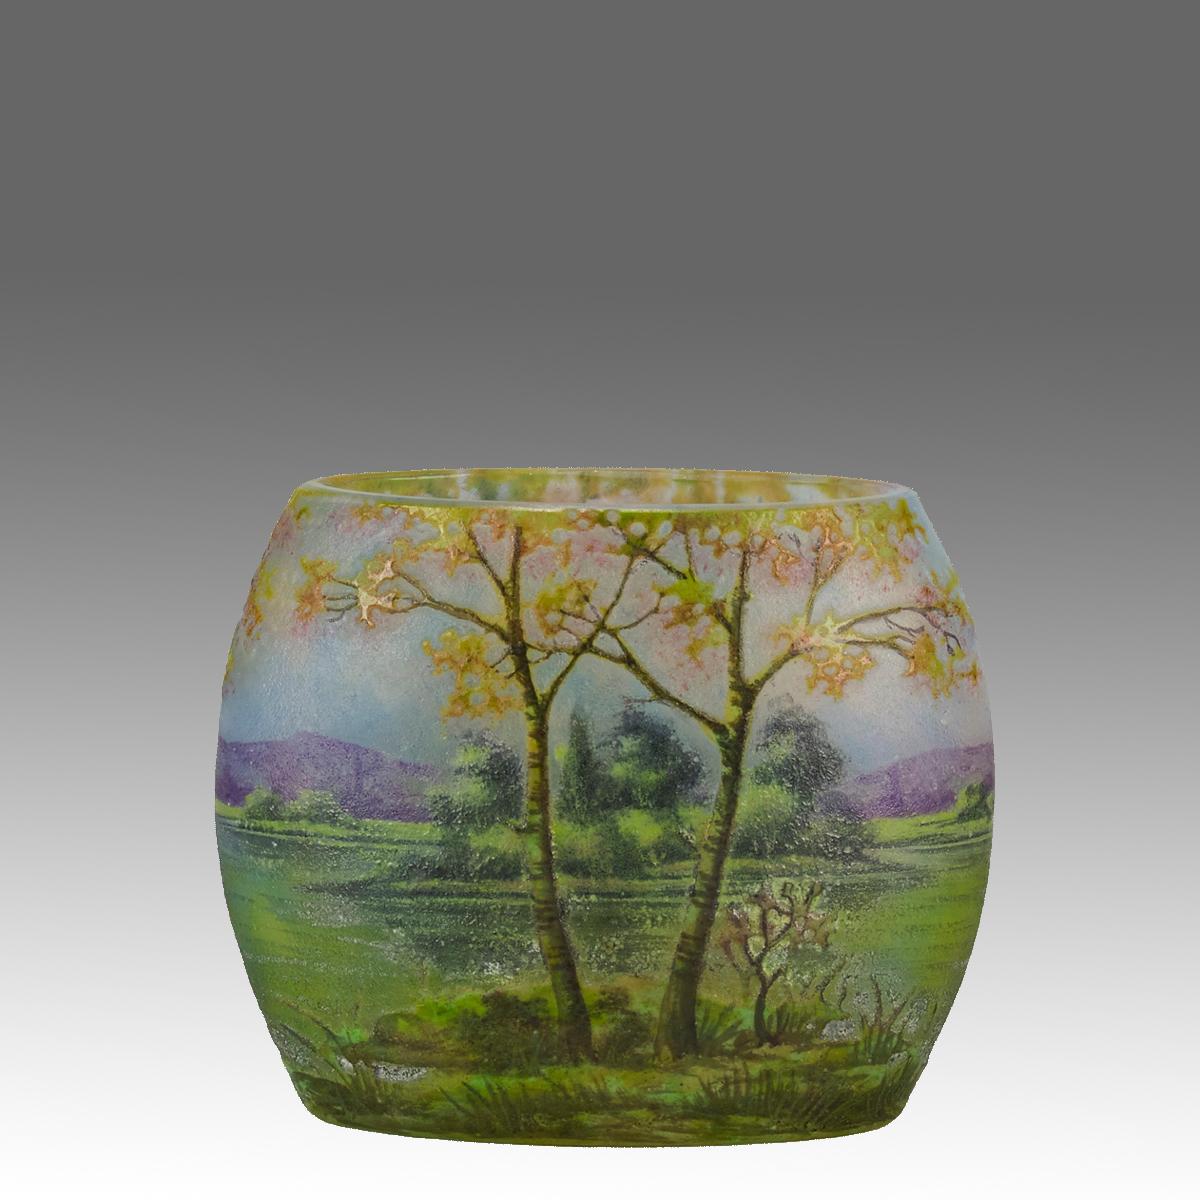 A delightful late 19th Century cameo glass vase etched and enamel painted with a beautiful landscape in the midst of summer with excellent detail and very fine colour,   Signed Daum Nancy with the Cross of Lorraine.
ADDITIONAL INFORMATION
Height:   